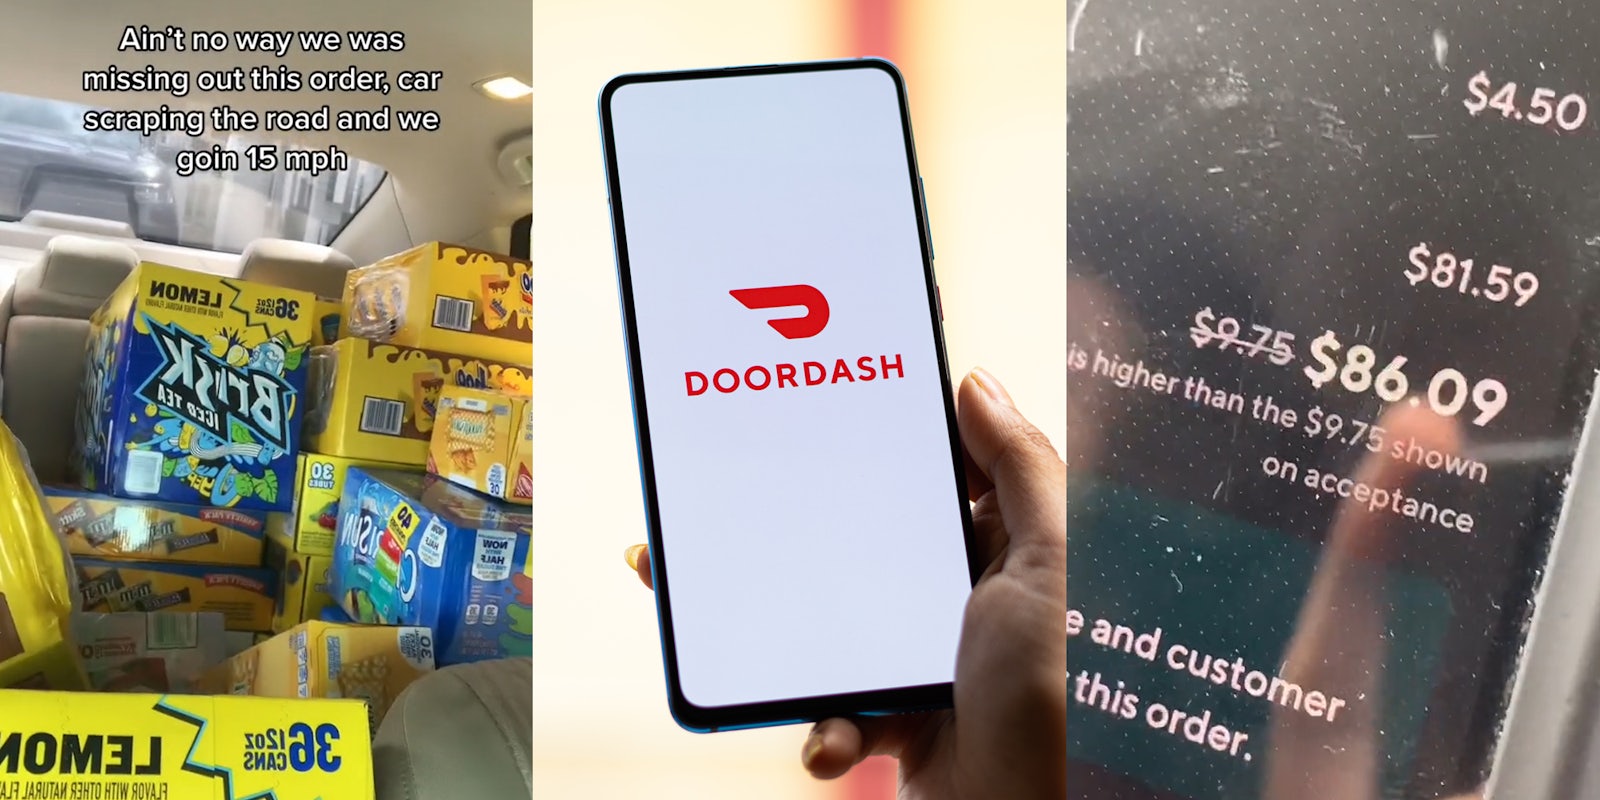 DoorDash driver's back seat of car filled with drinks with caption 'Ain't no way we was missing out this order, car scraping the road and we goin 15 mph' (l) hand holding phone with DoorDash on screen in front of tan blurred background (c) DoorDash driver's phone with $86.09 on screen (r)